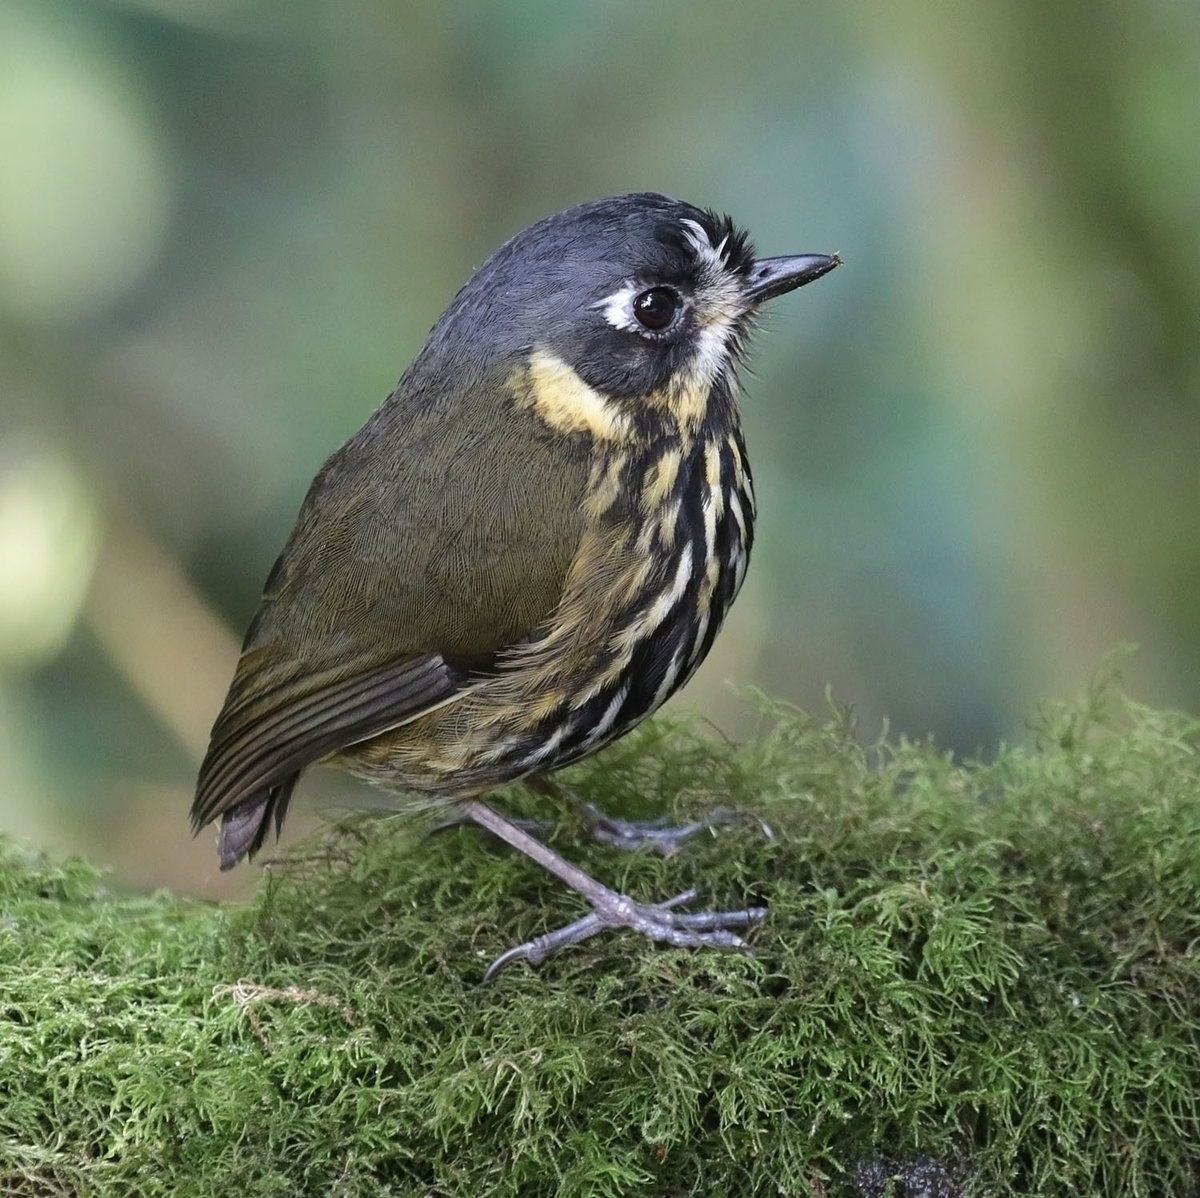 Crescent-faced Antpitta, HDA Bosque, Colombia.

One of the best birds in the world.